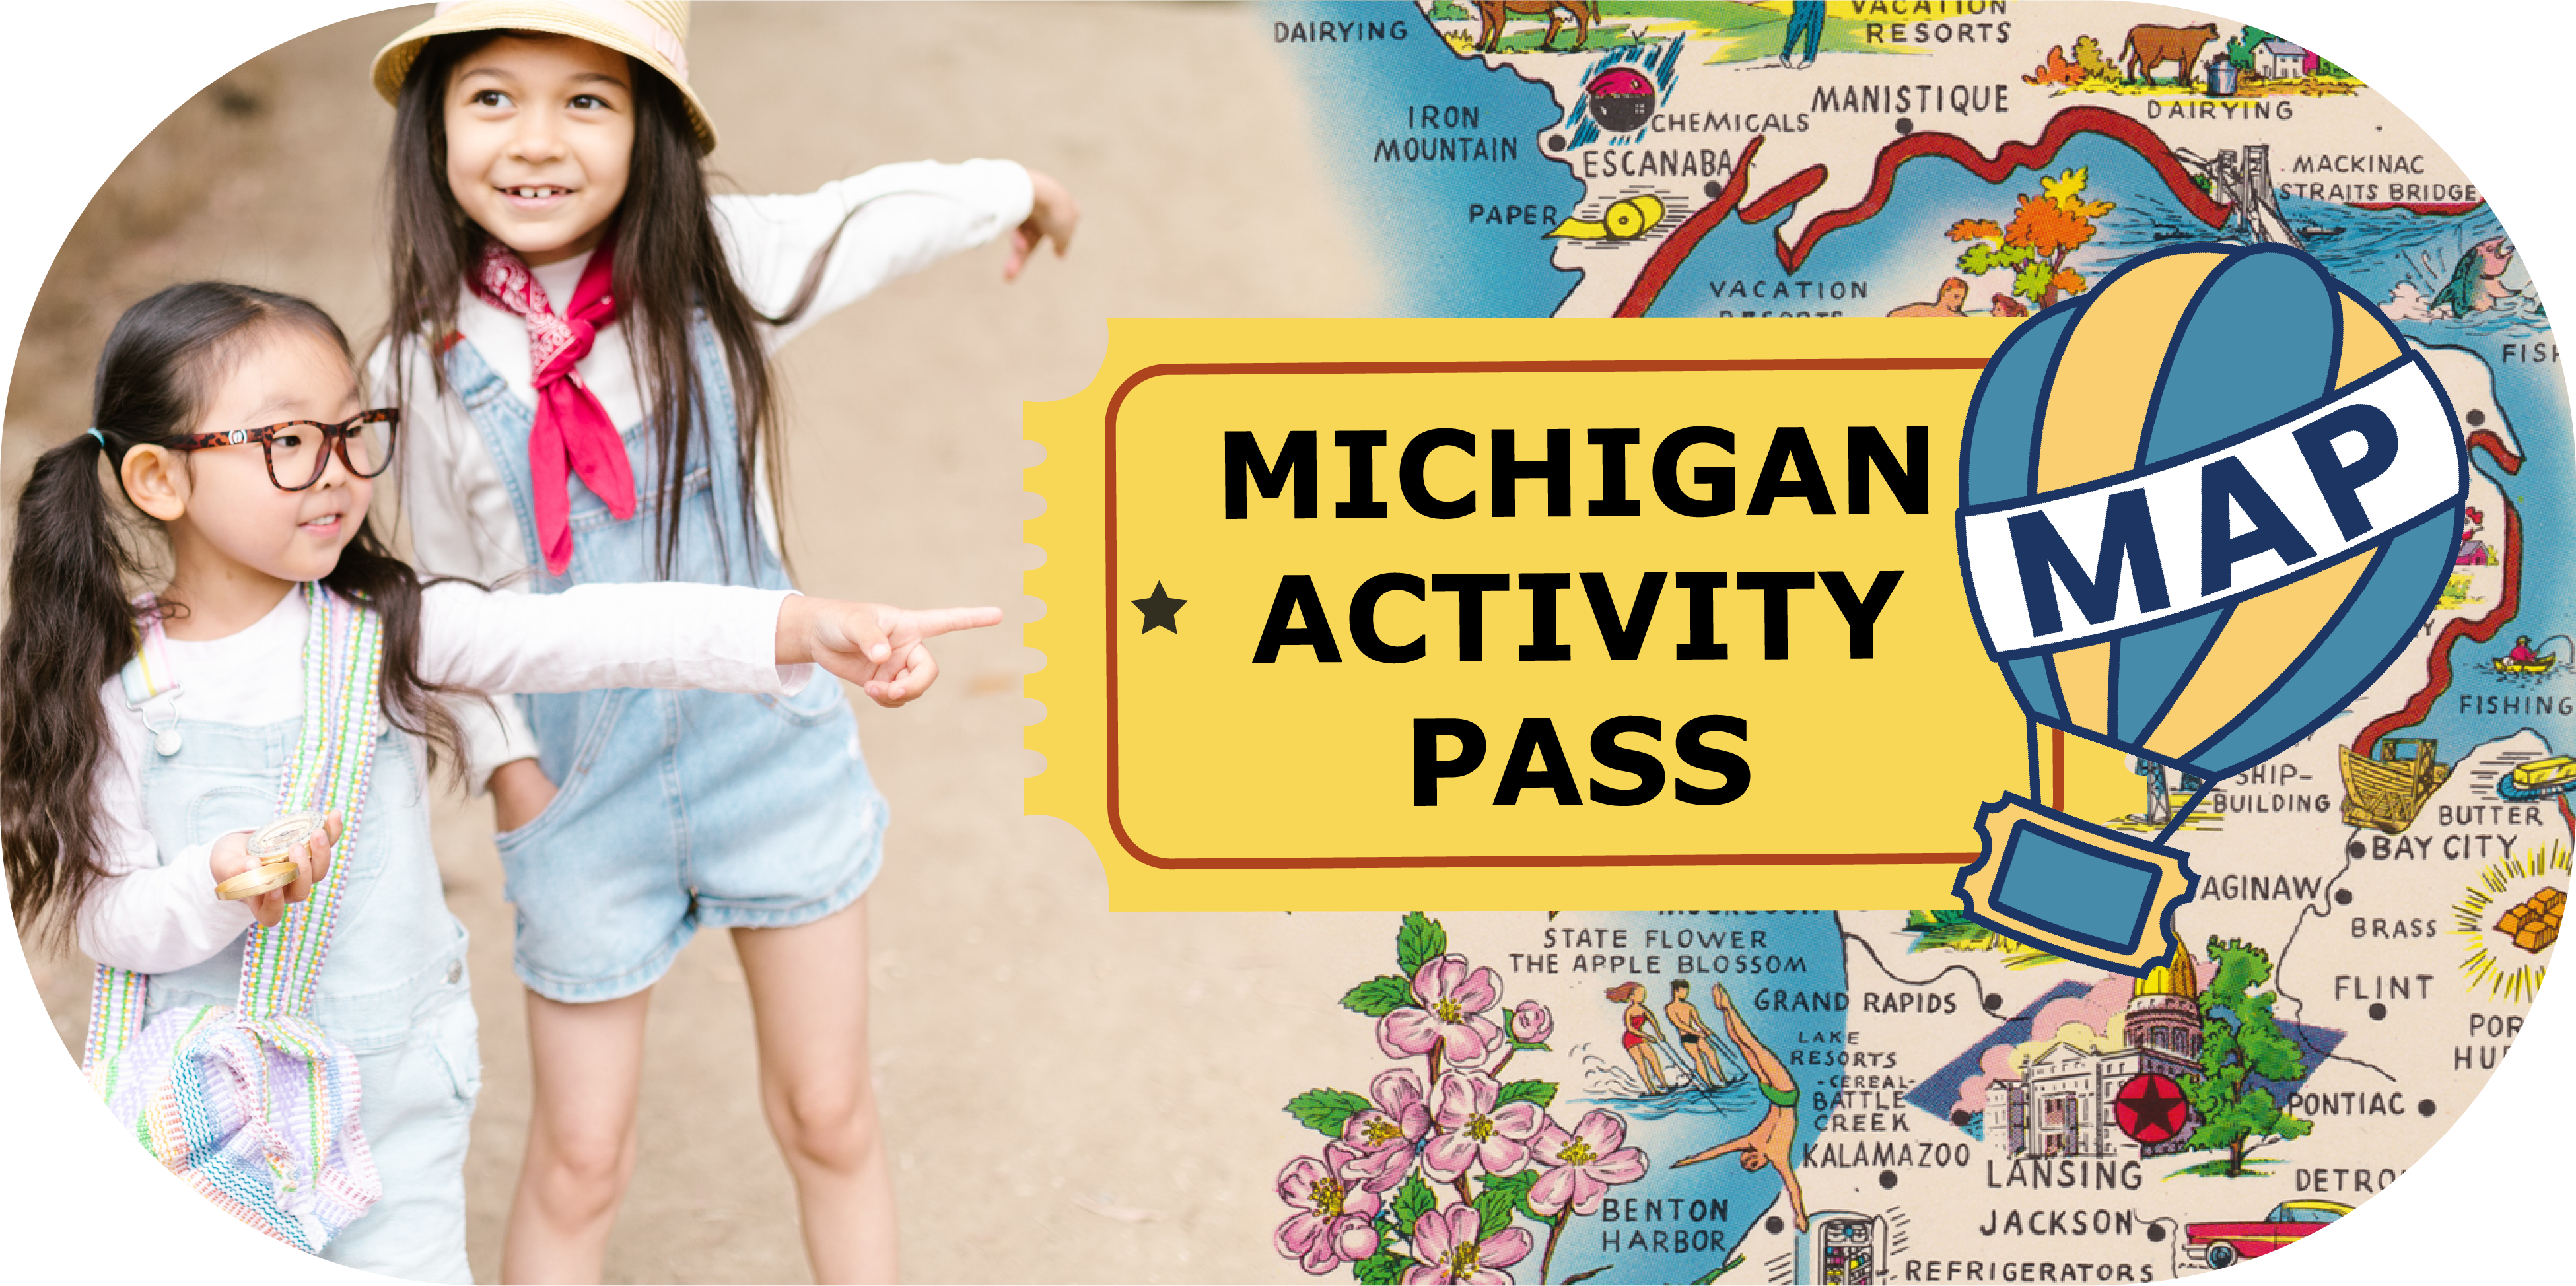 A link to Michigan's Activity Pass.